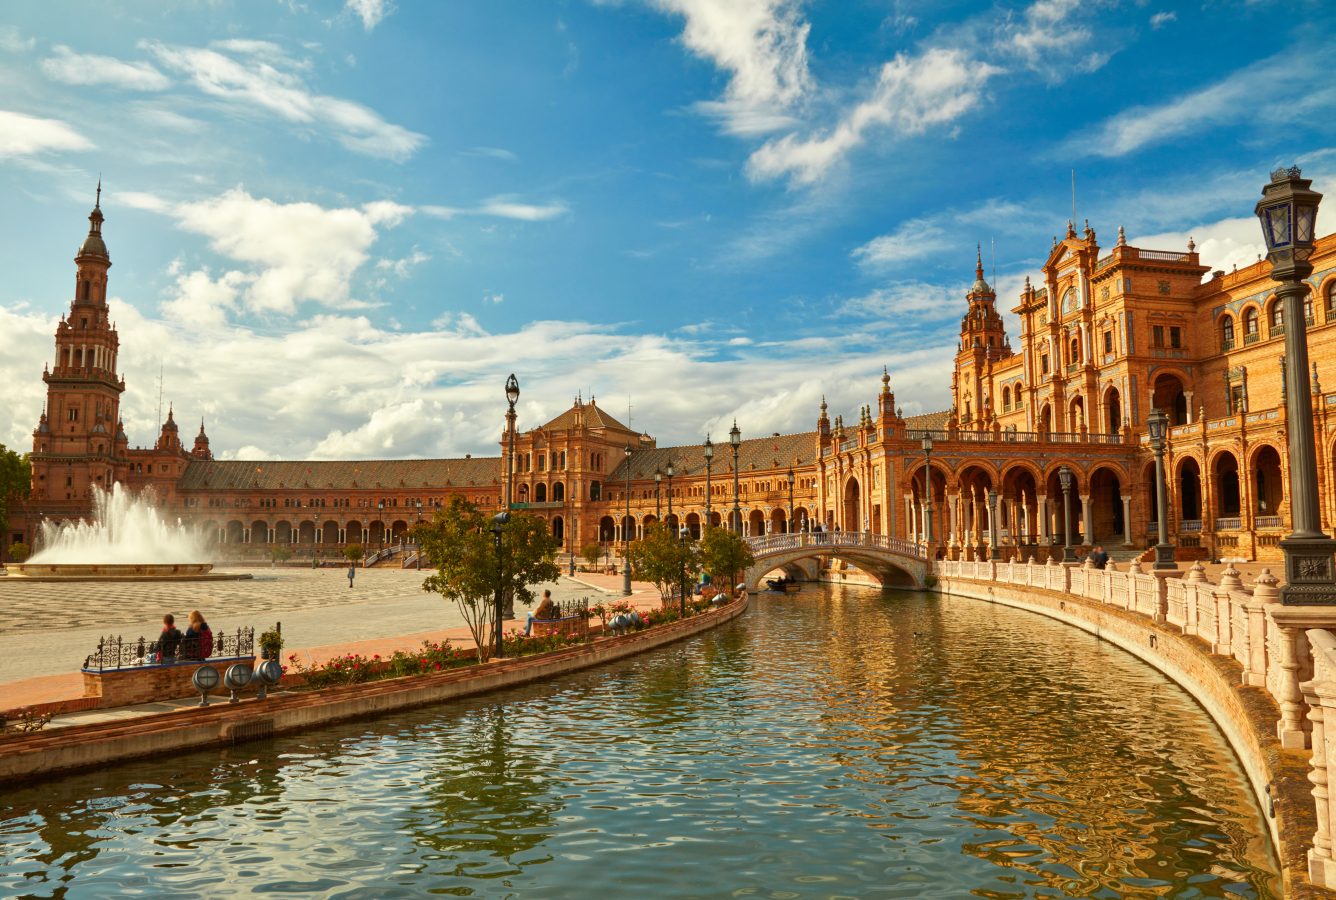 The Plaza de Espana in Seville, Spain - an awesome destination for study abroad programs.